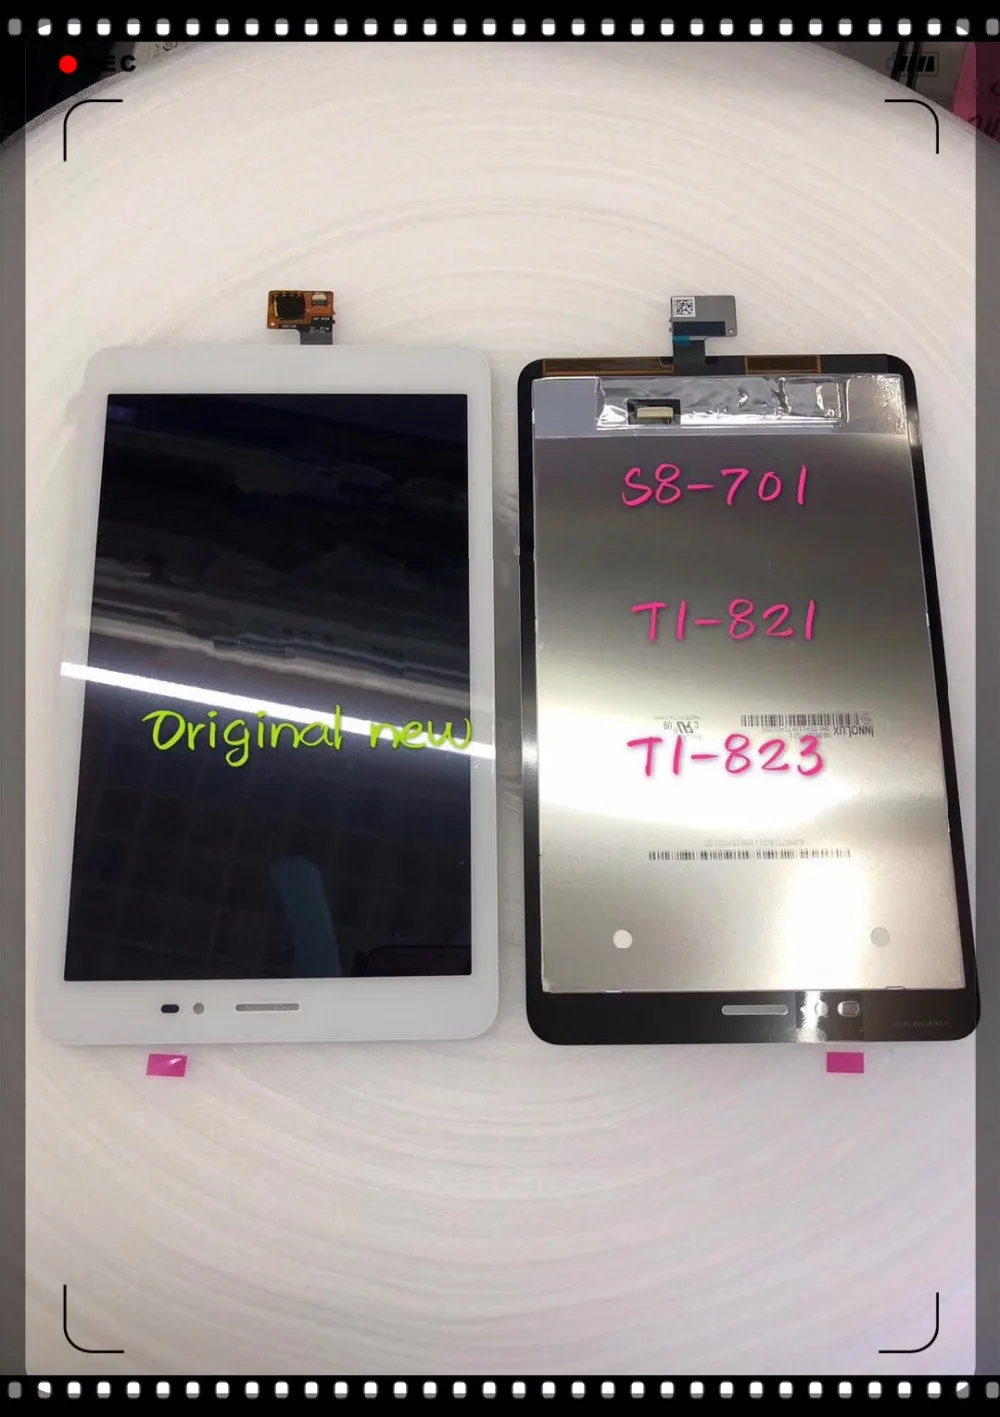 

For Replacement New LCD Display Touch Screen Assembly For Huawei MediaPad T1 8.0 S8-701U S8-701 T1-821W T1-823L 8-inch White